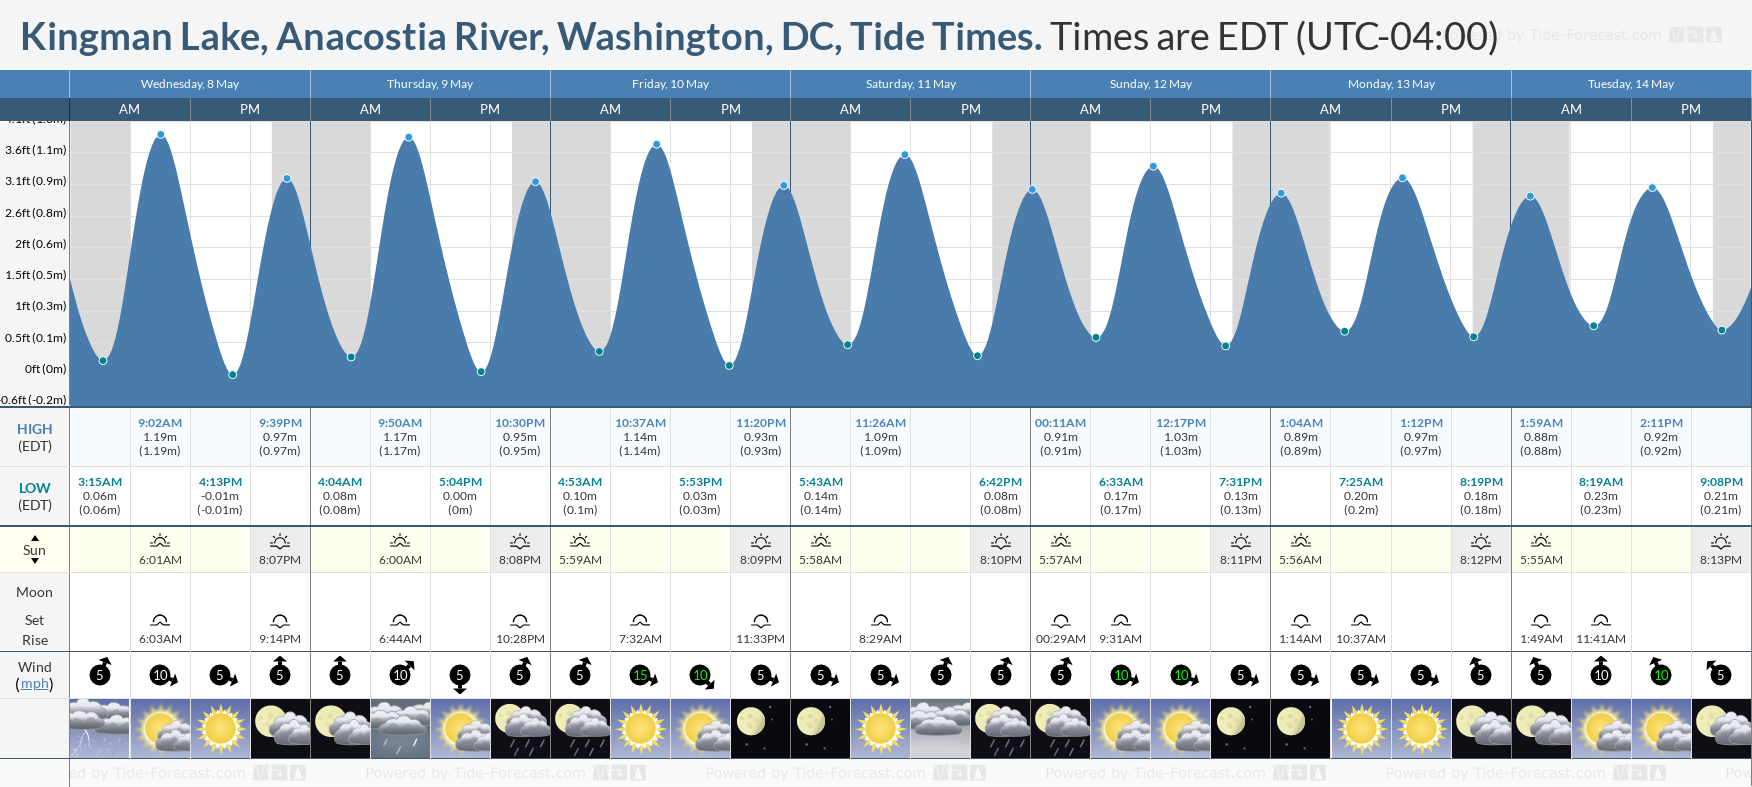 Kingman Lake, Anacostia River, Washington, DC Tide Chart including high and low tide tide times for the next 7 days